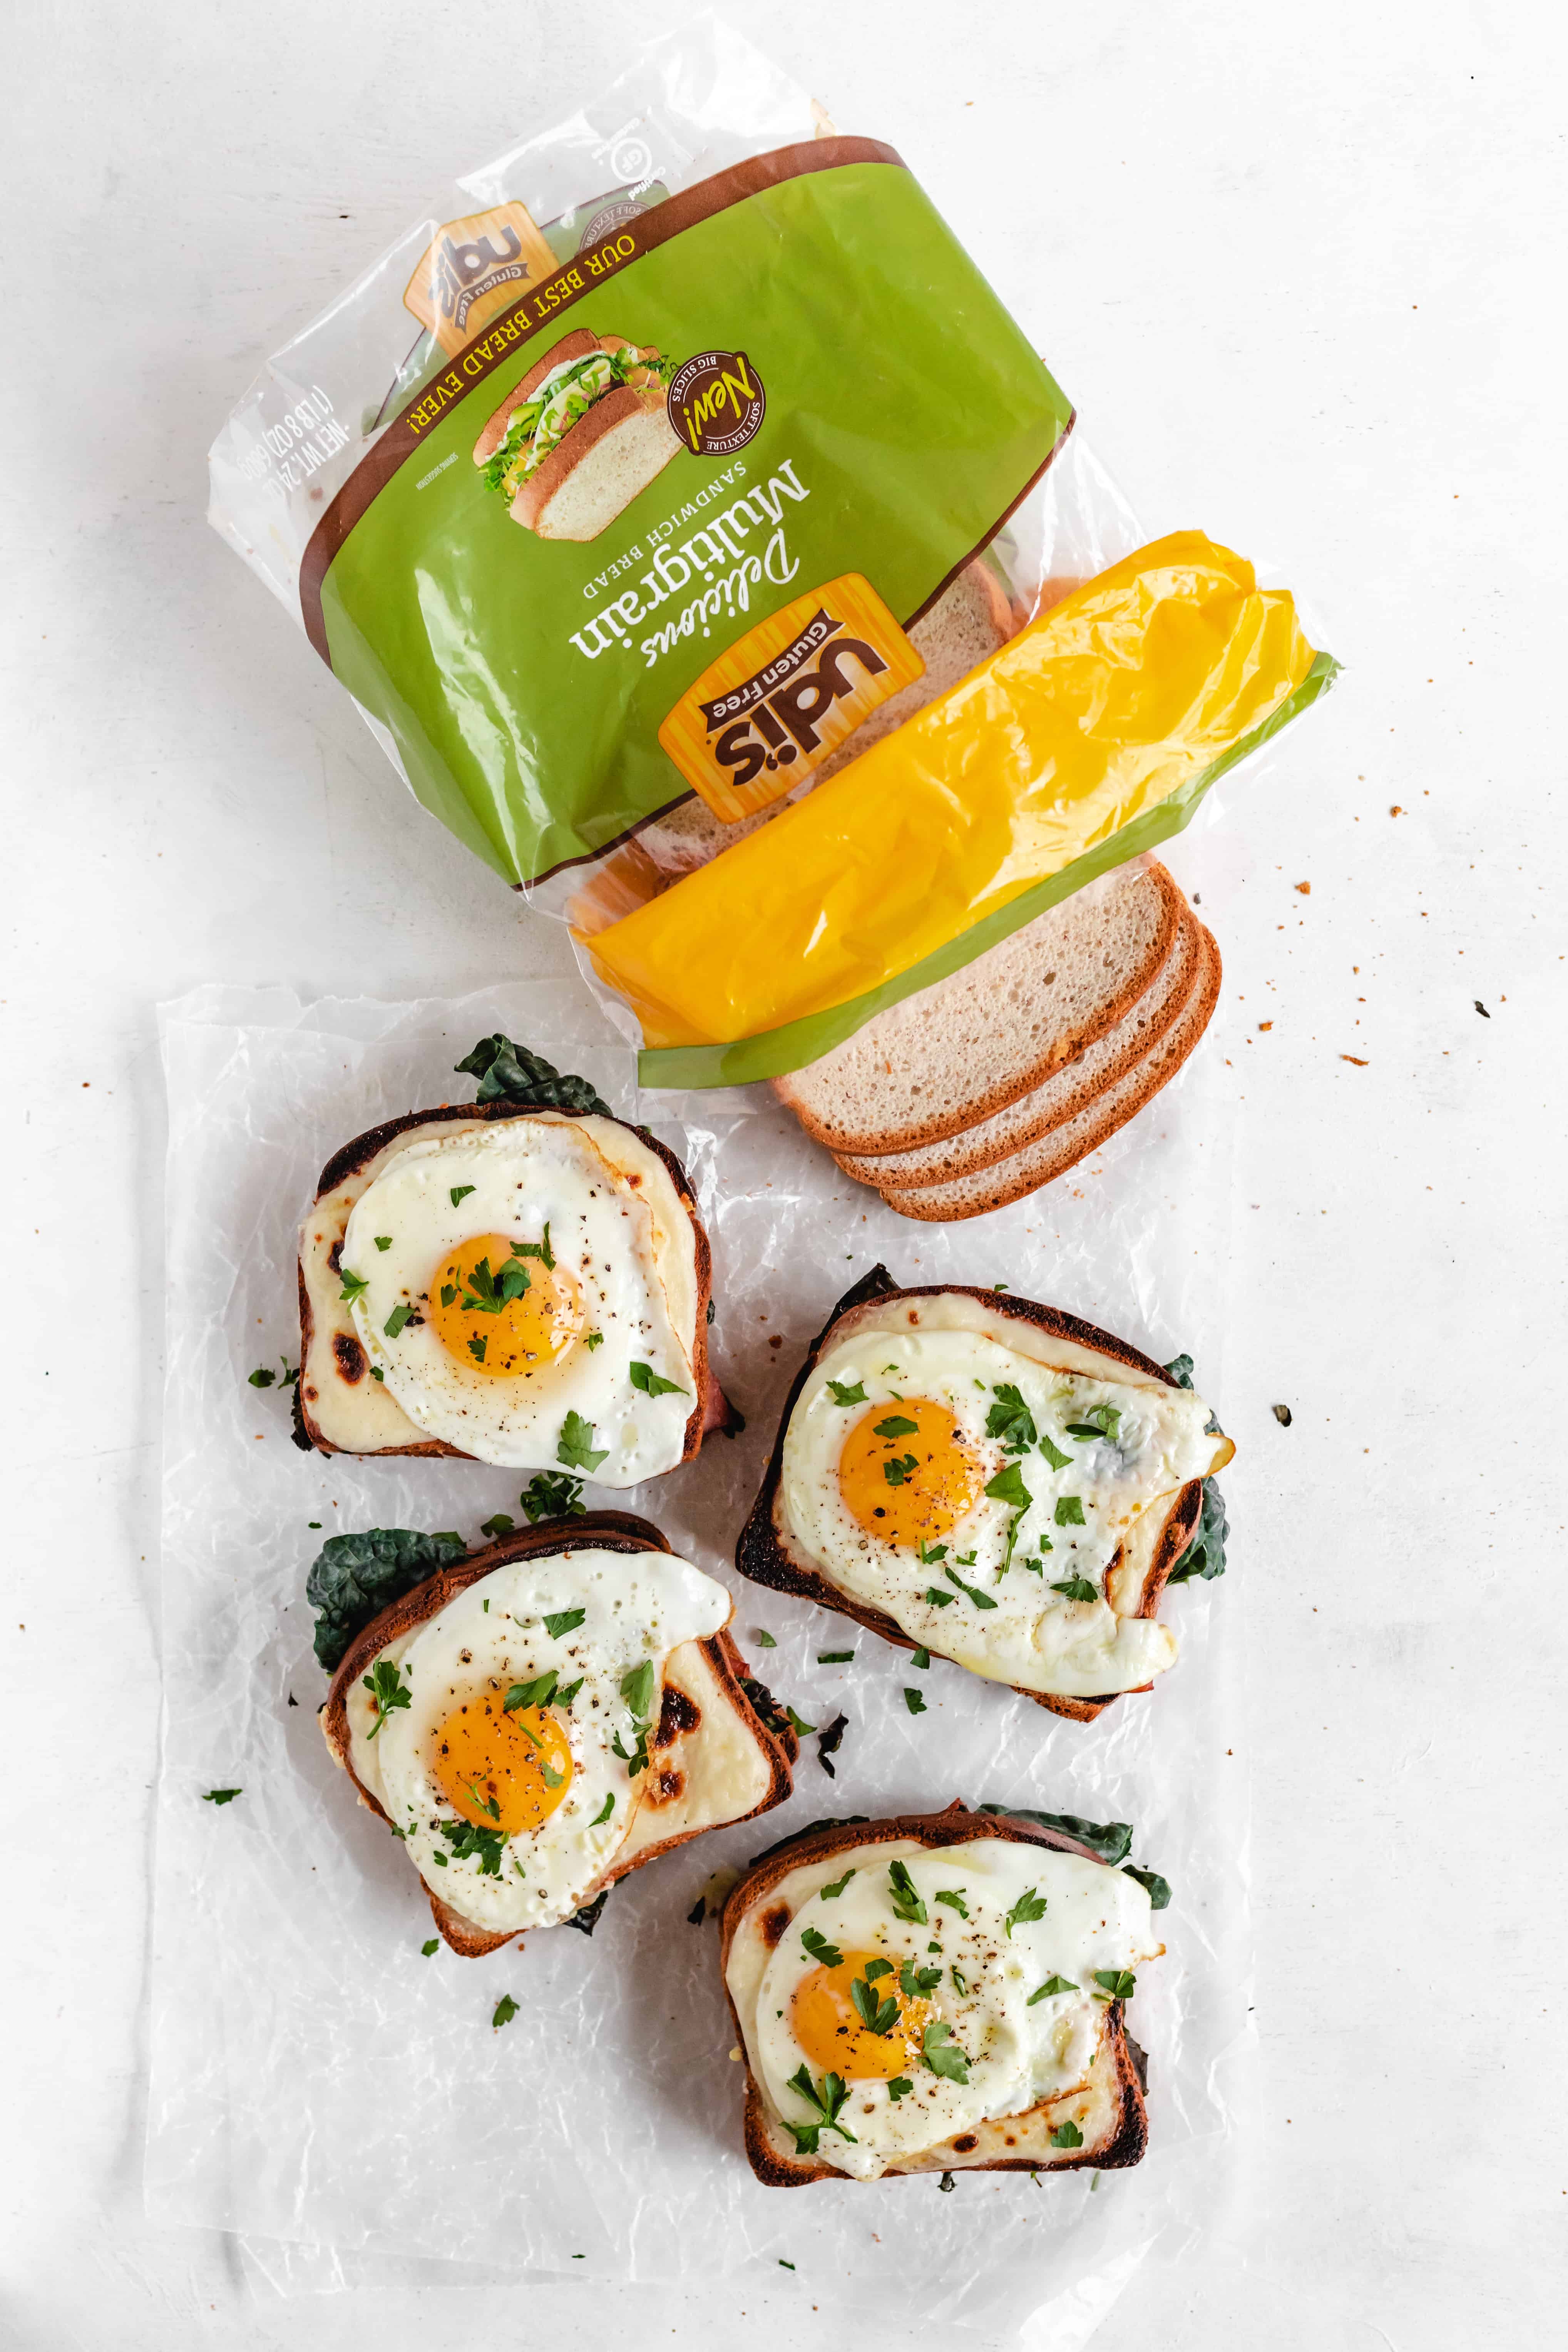 Gluten Free Kale Croque Madame Grilled Cheese